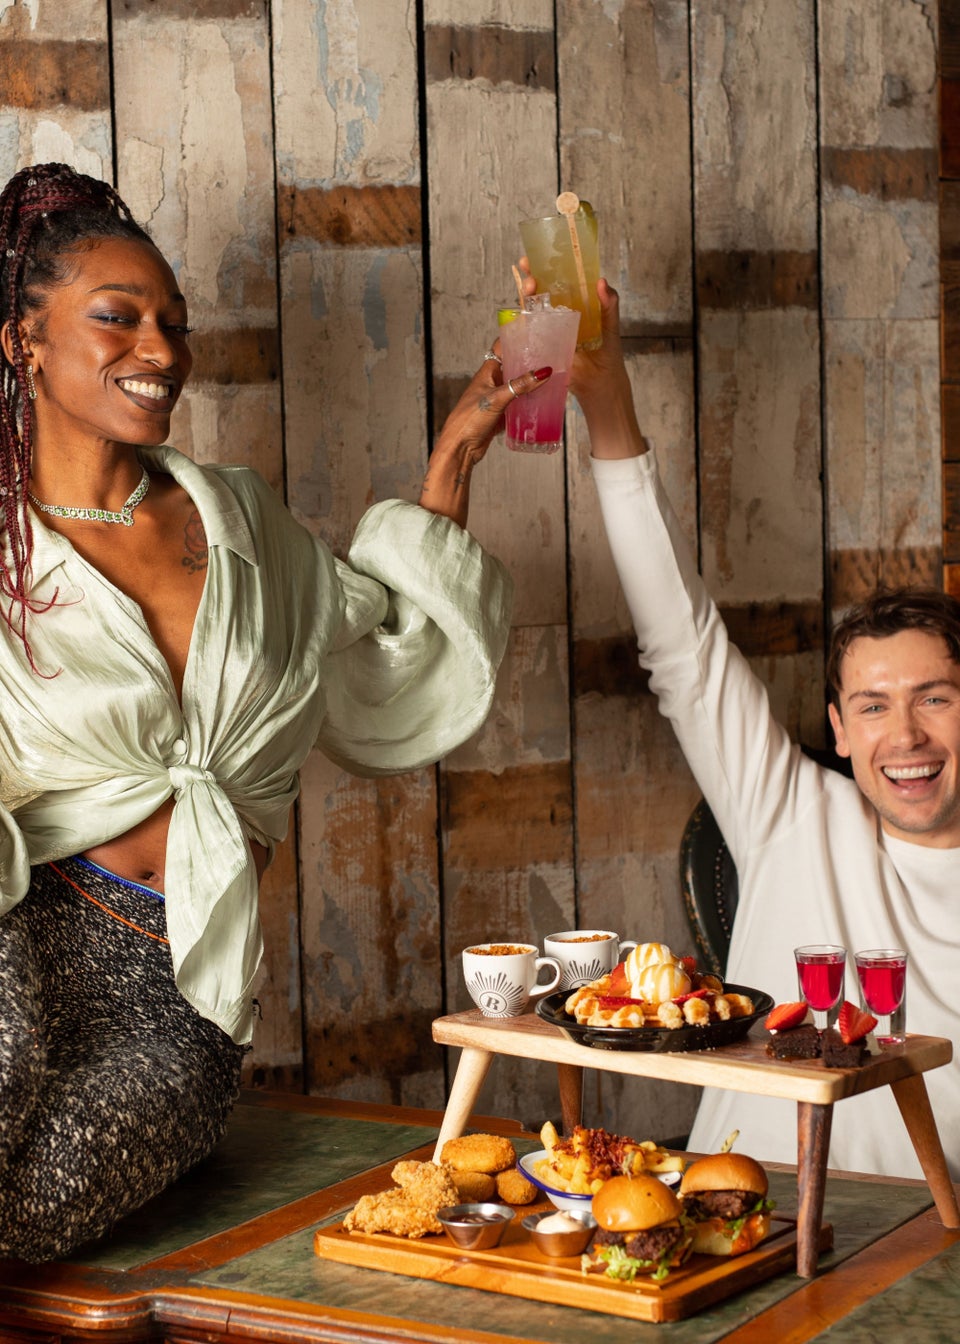 Virgin Experience Days Afternoon Tea with Cocktail for Two at Revolution Bars